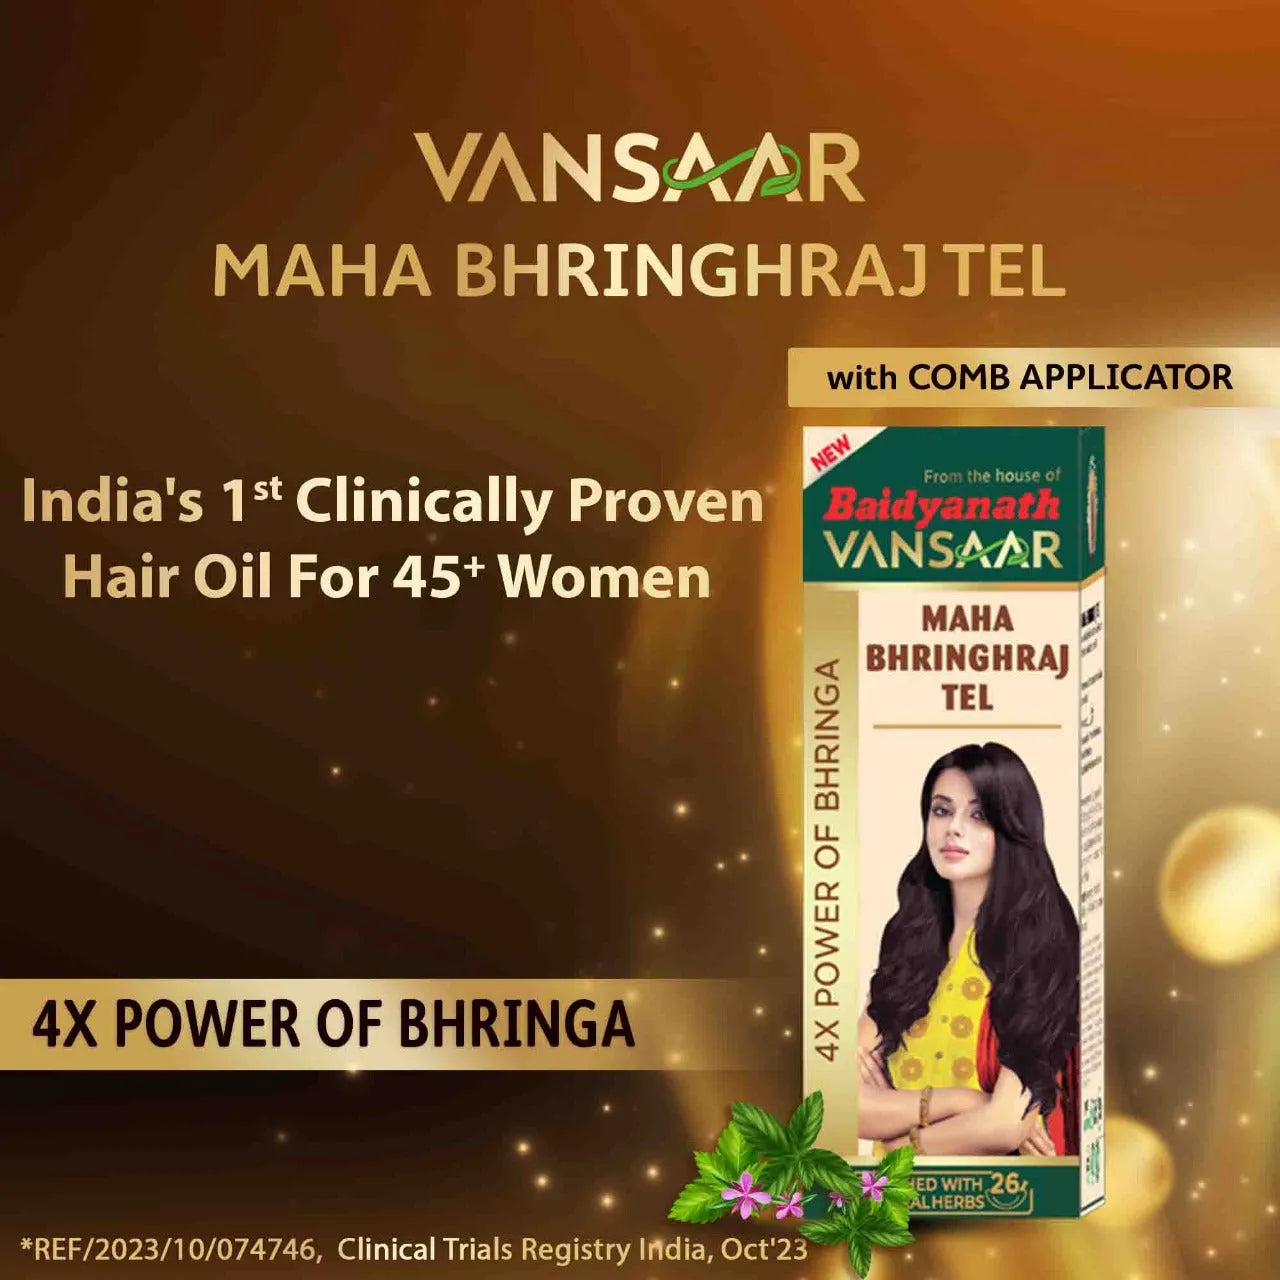 Maha Bhringhraj Hair Oil | Clinically Proven to Reduce Hair Fall By 20% in 45+ Women | With Comb Applicator - Vansaar